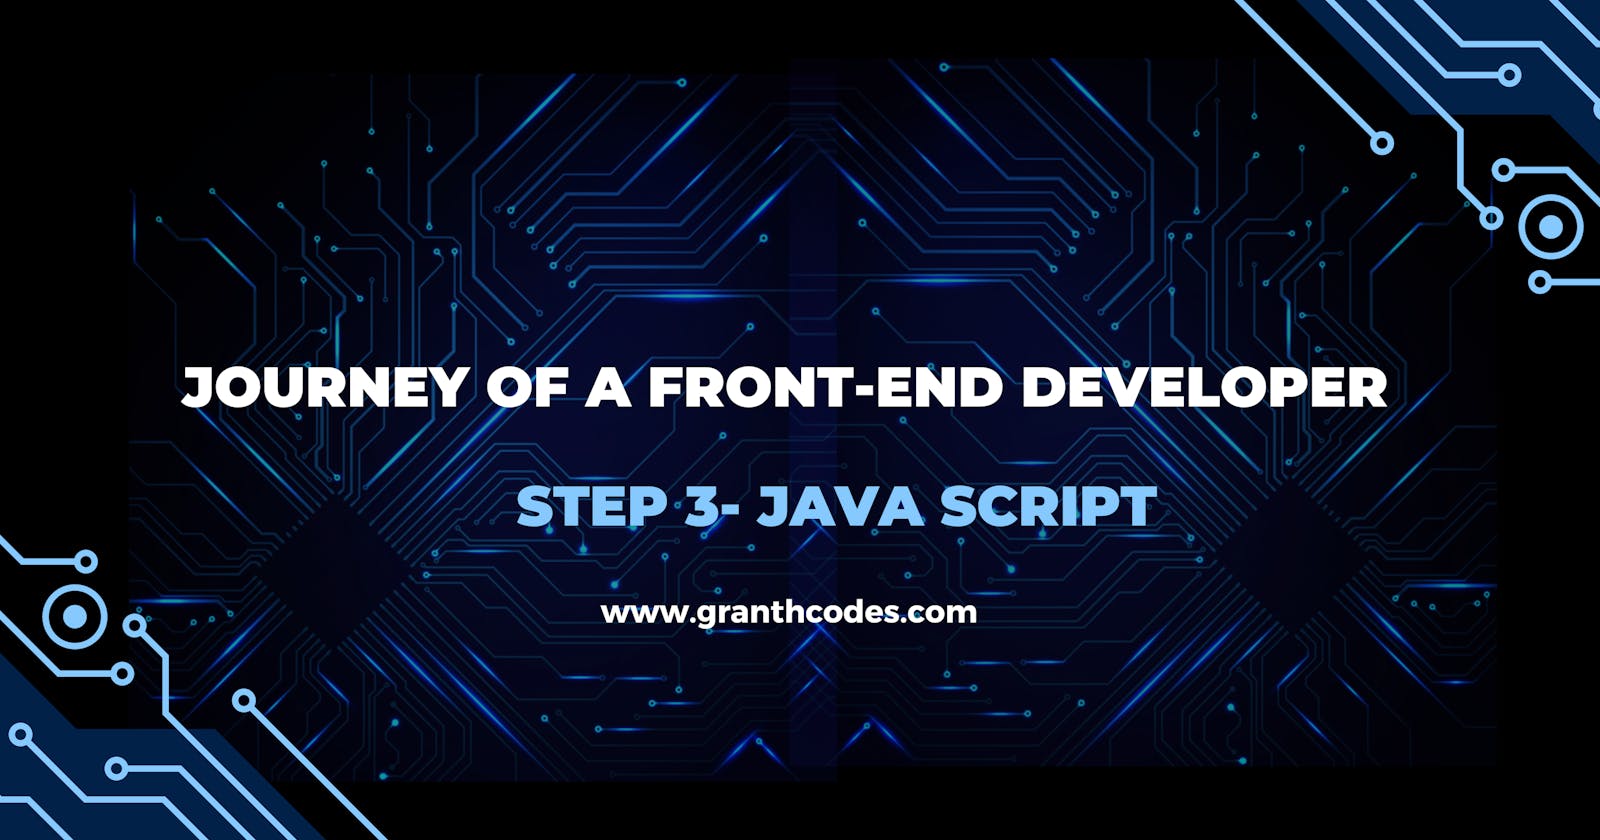 Journey of the Front-end Developer  step three is JavaScript